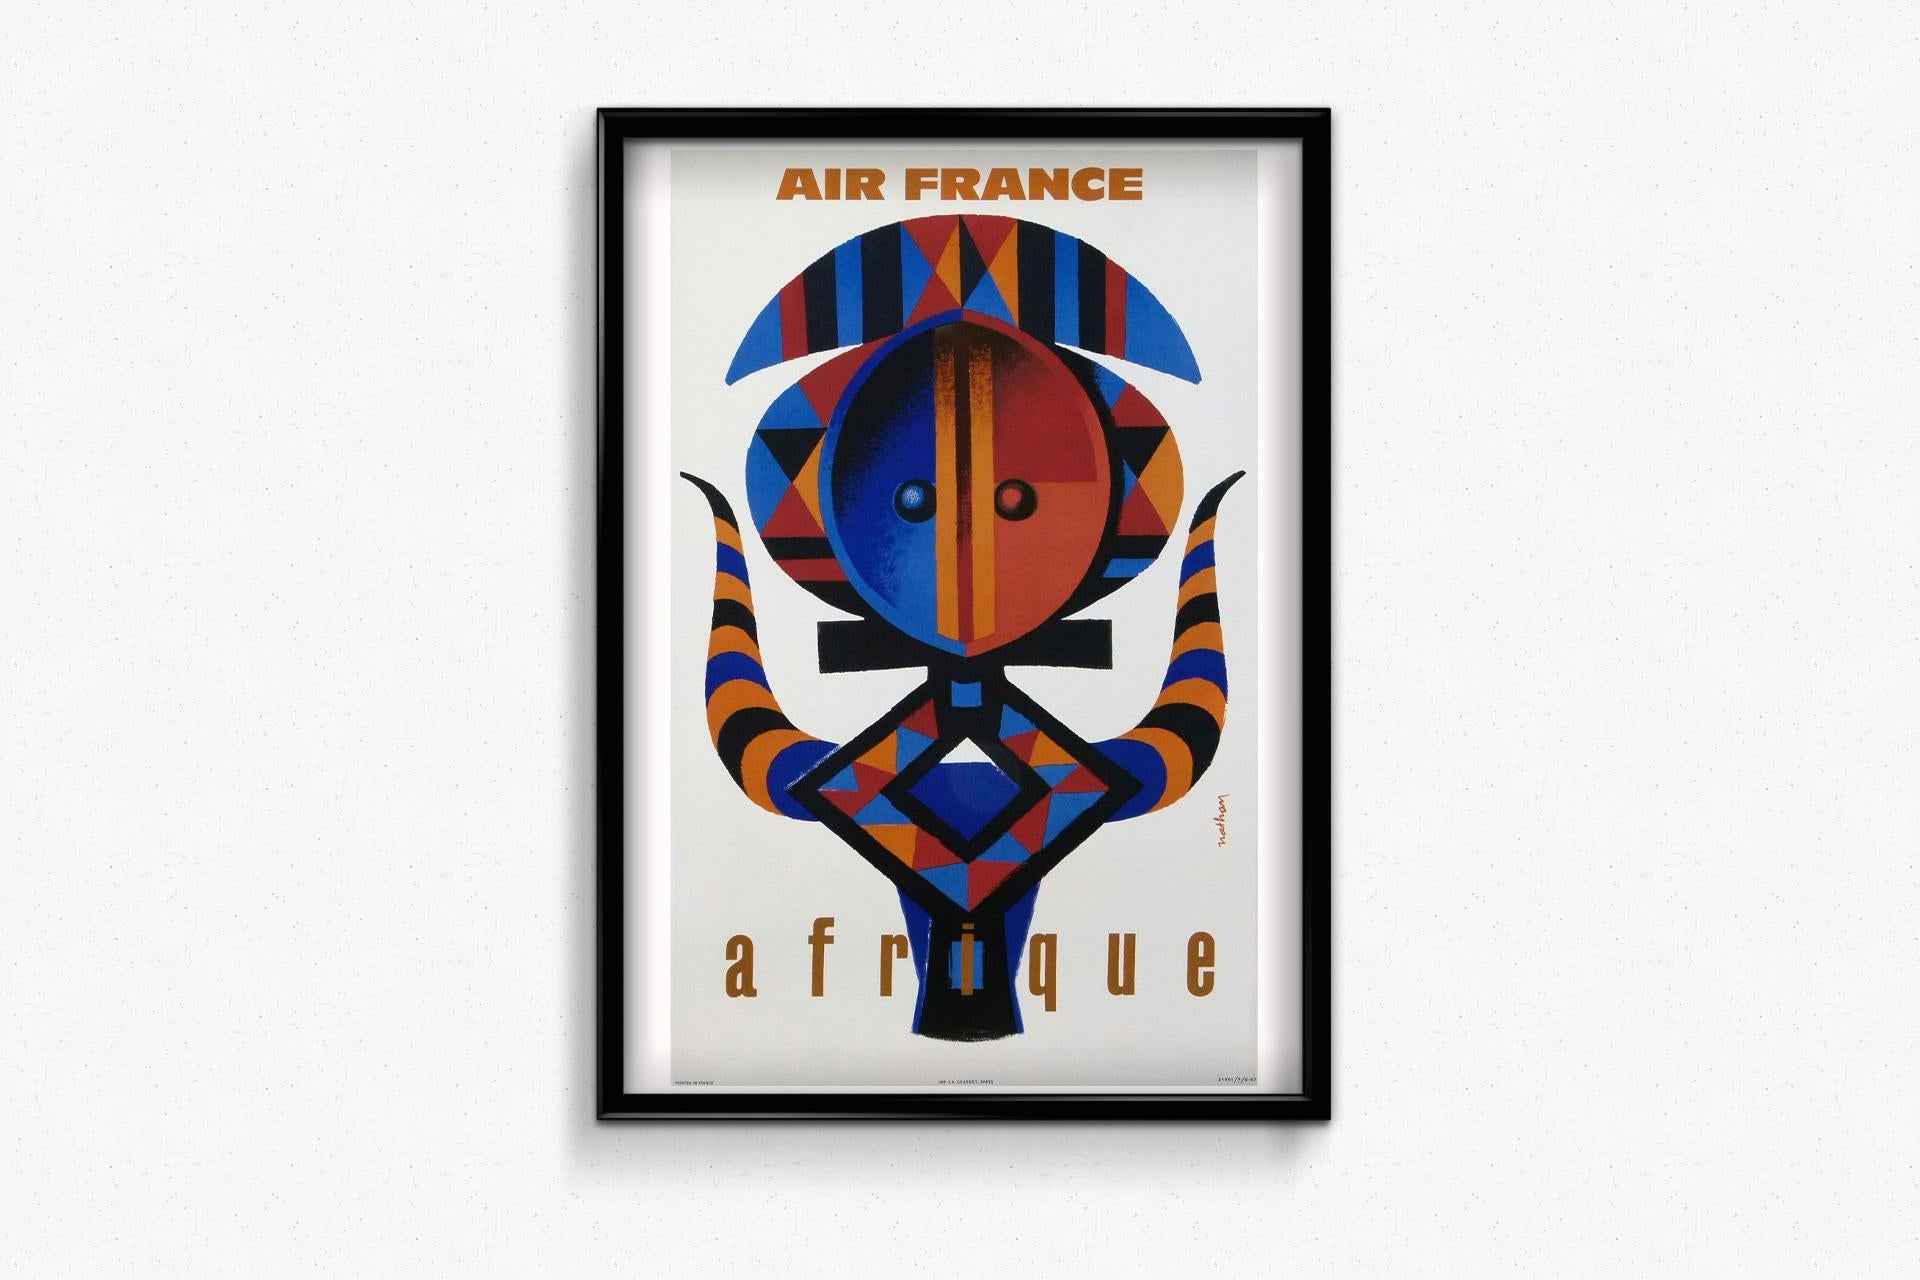 Beautiful poster created in 1960 by Jacques Nathan-Garamond 🇫🇷 (1910-2001) to promote Air France travel and flights to Africa.

Thanks to his taste for abstraction, consolidated by an exceptional sense of color, Nathan has, throughout his career,